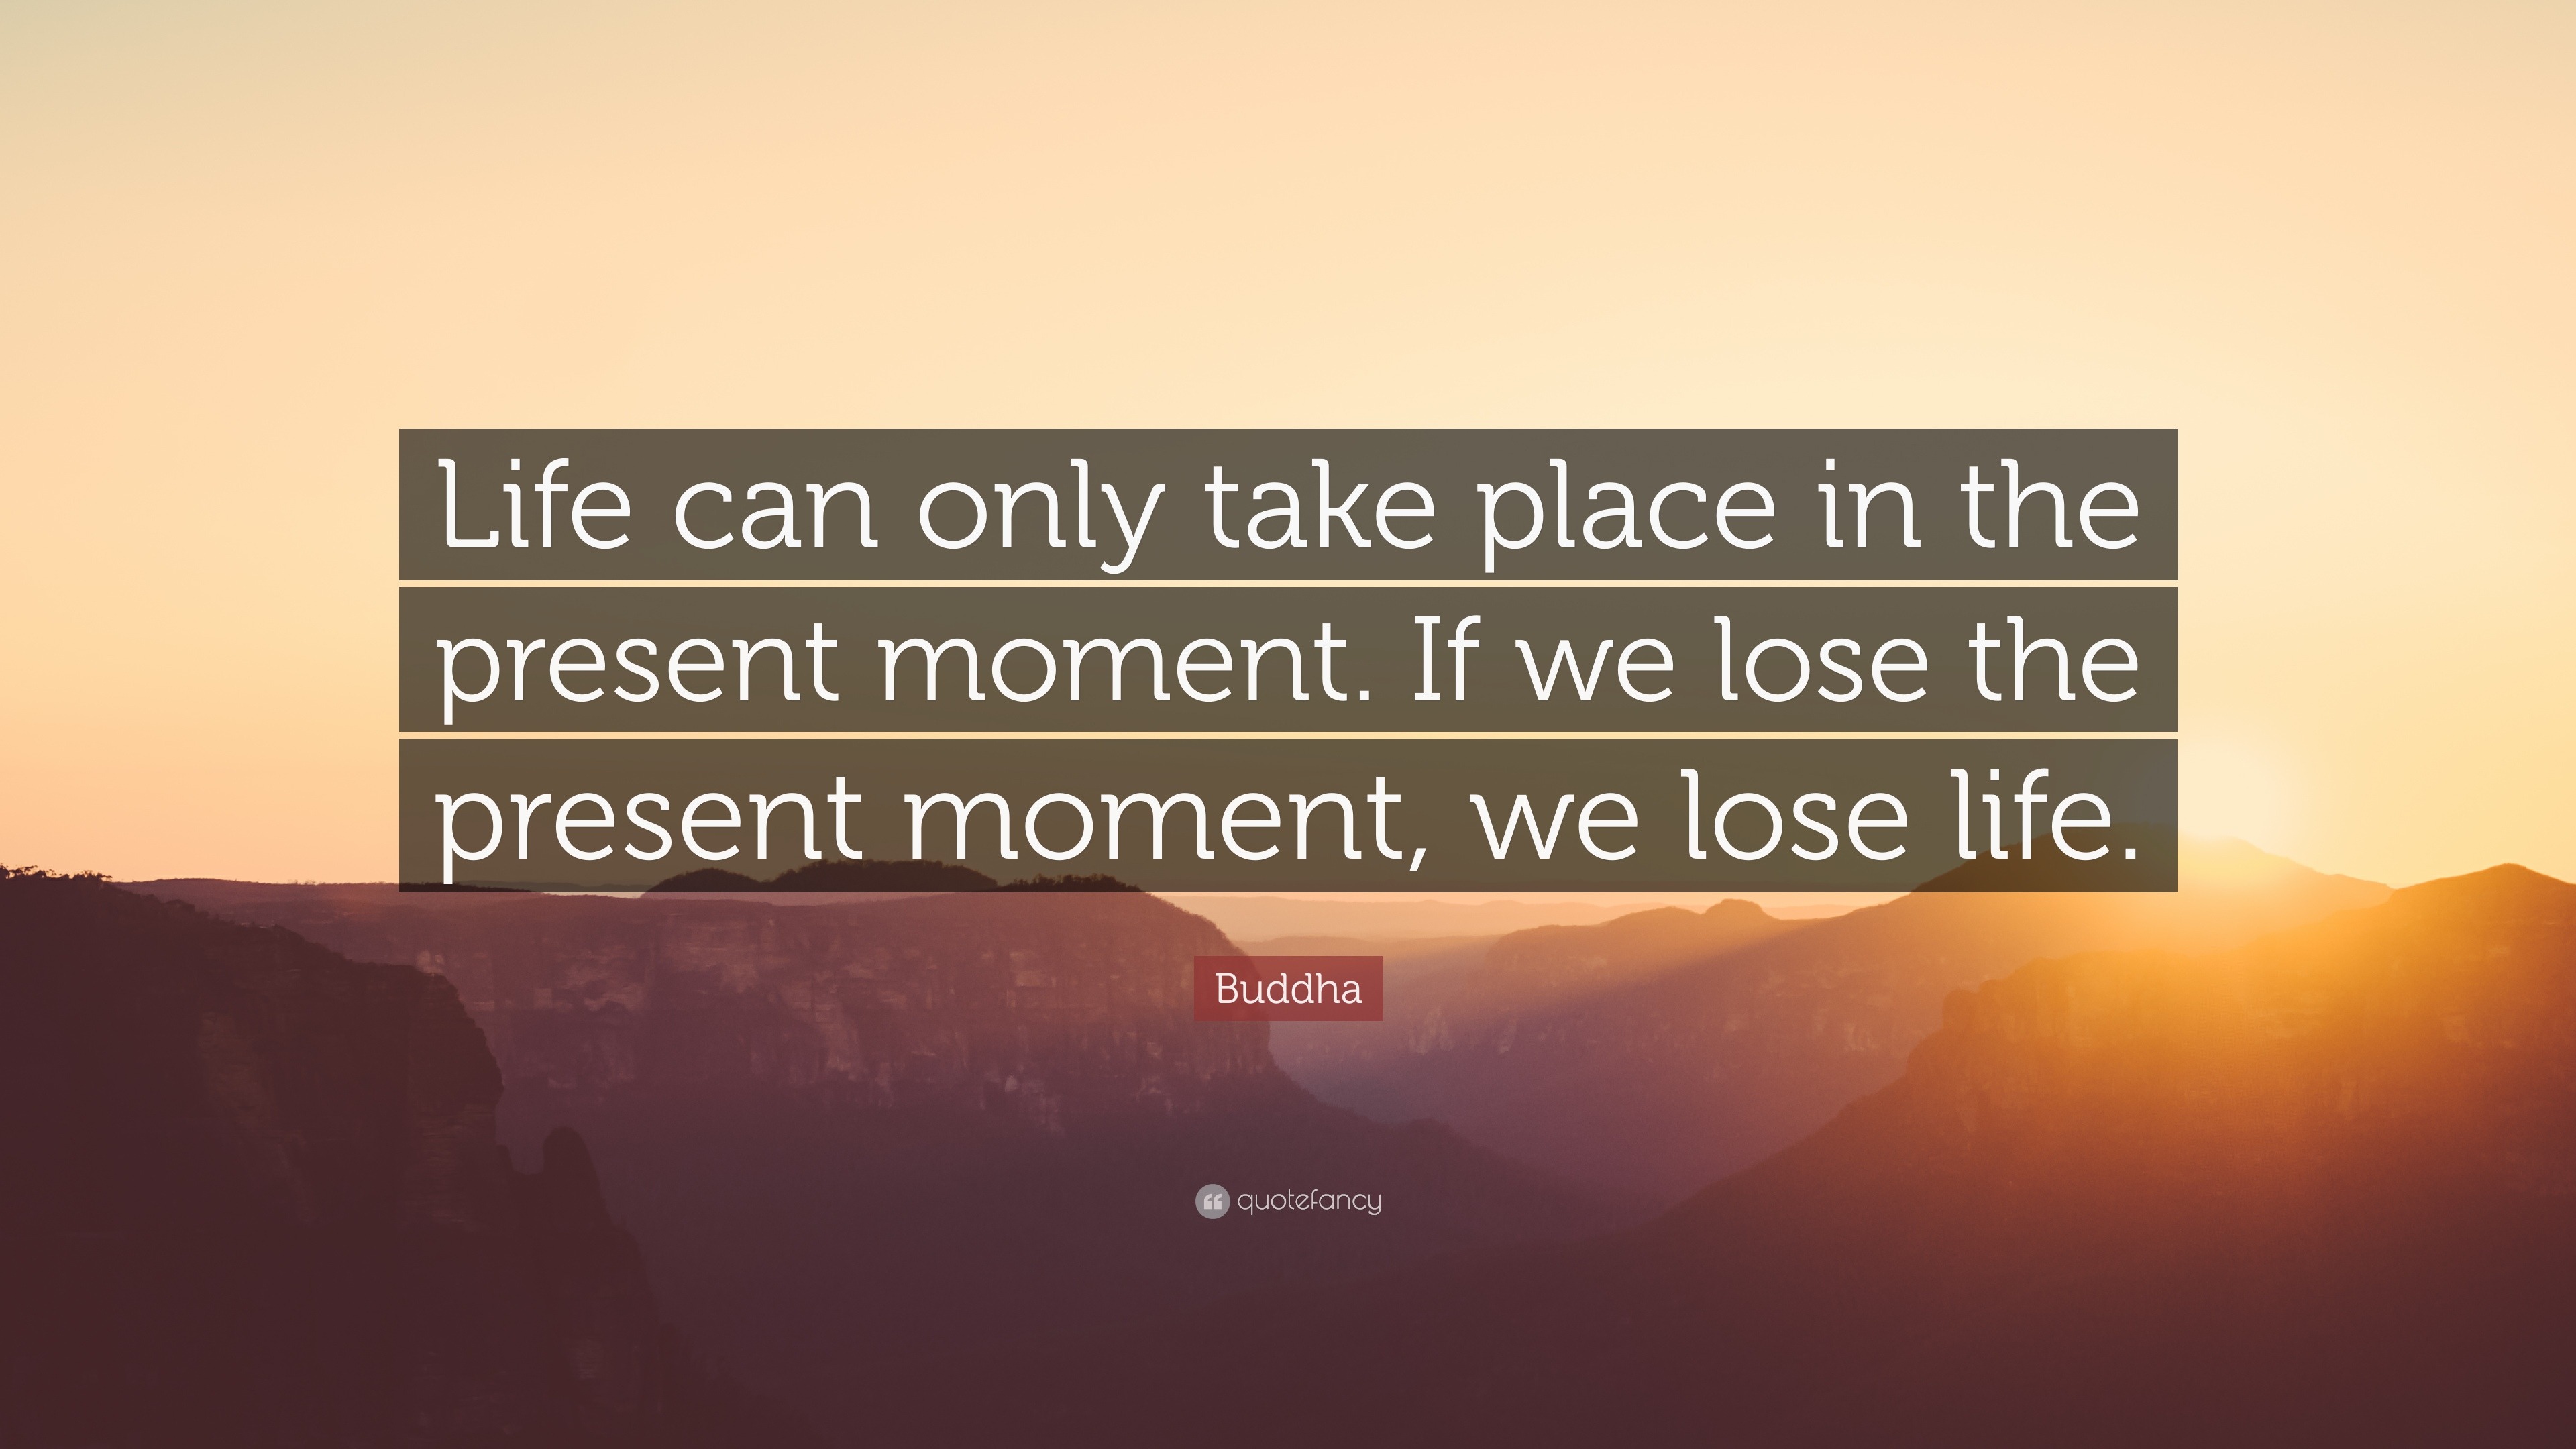 Buddha Quote Life Can Only Take Place In The Present Moment If We Lose The Present